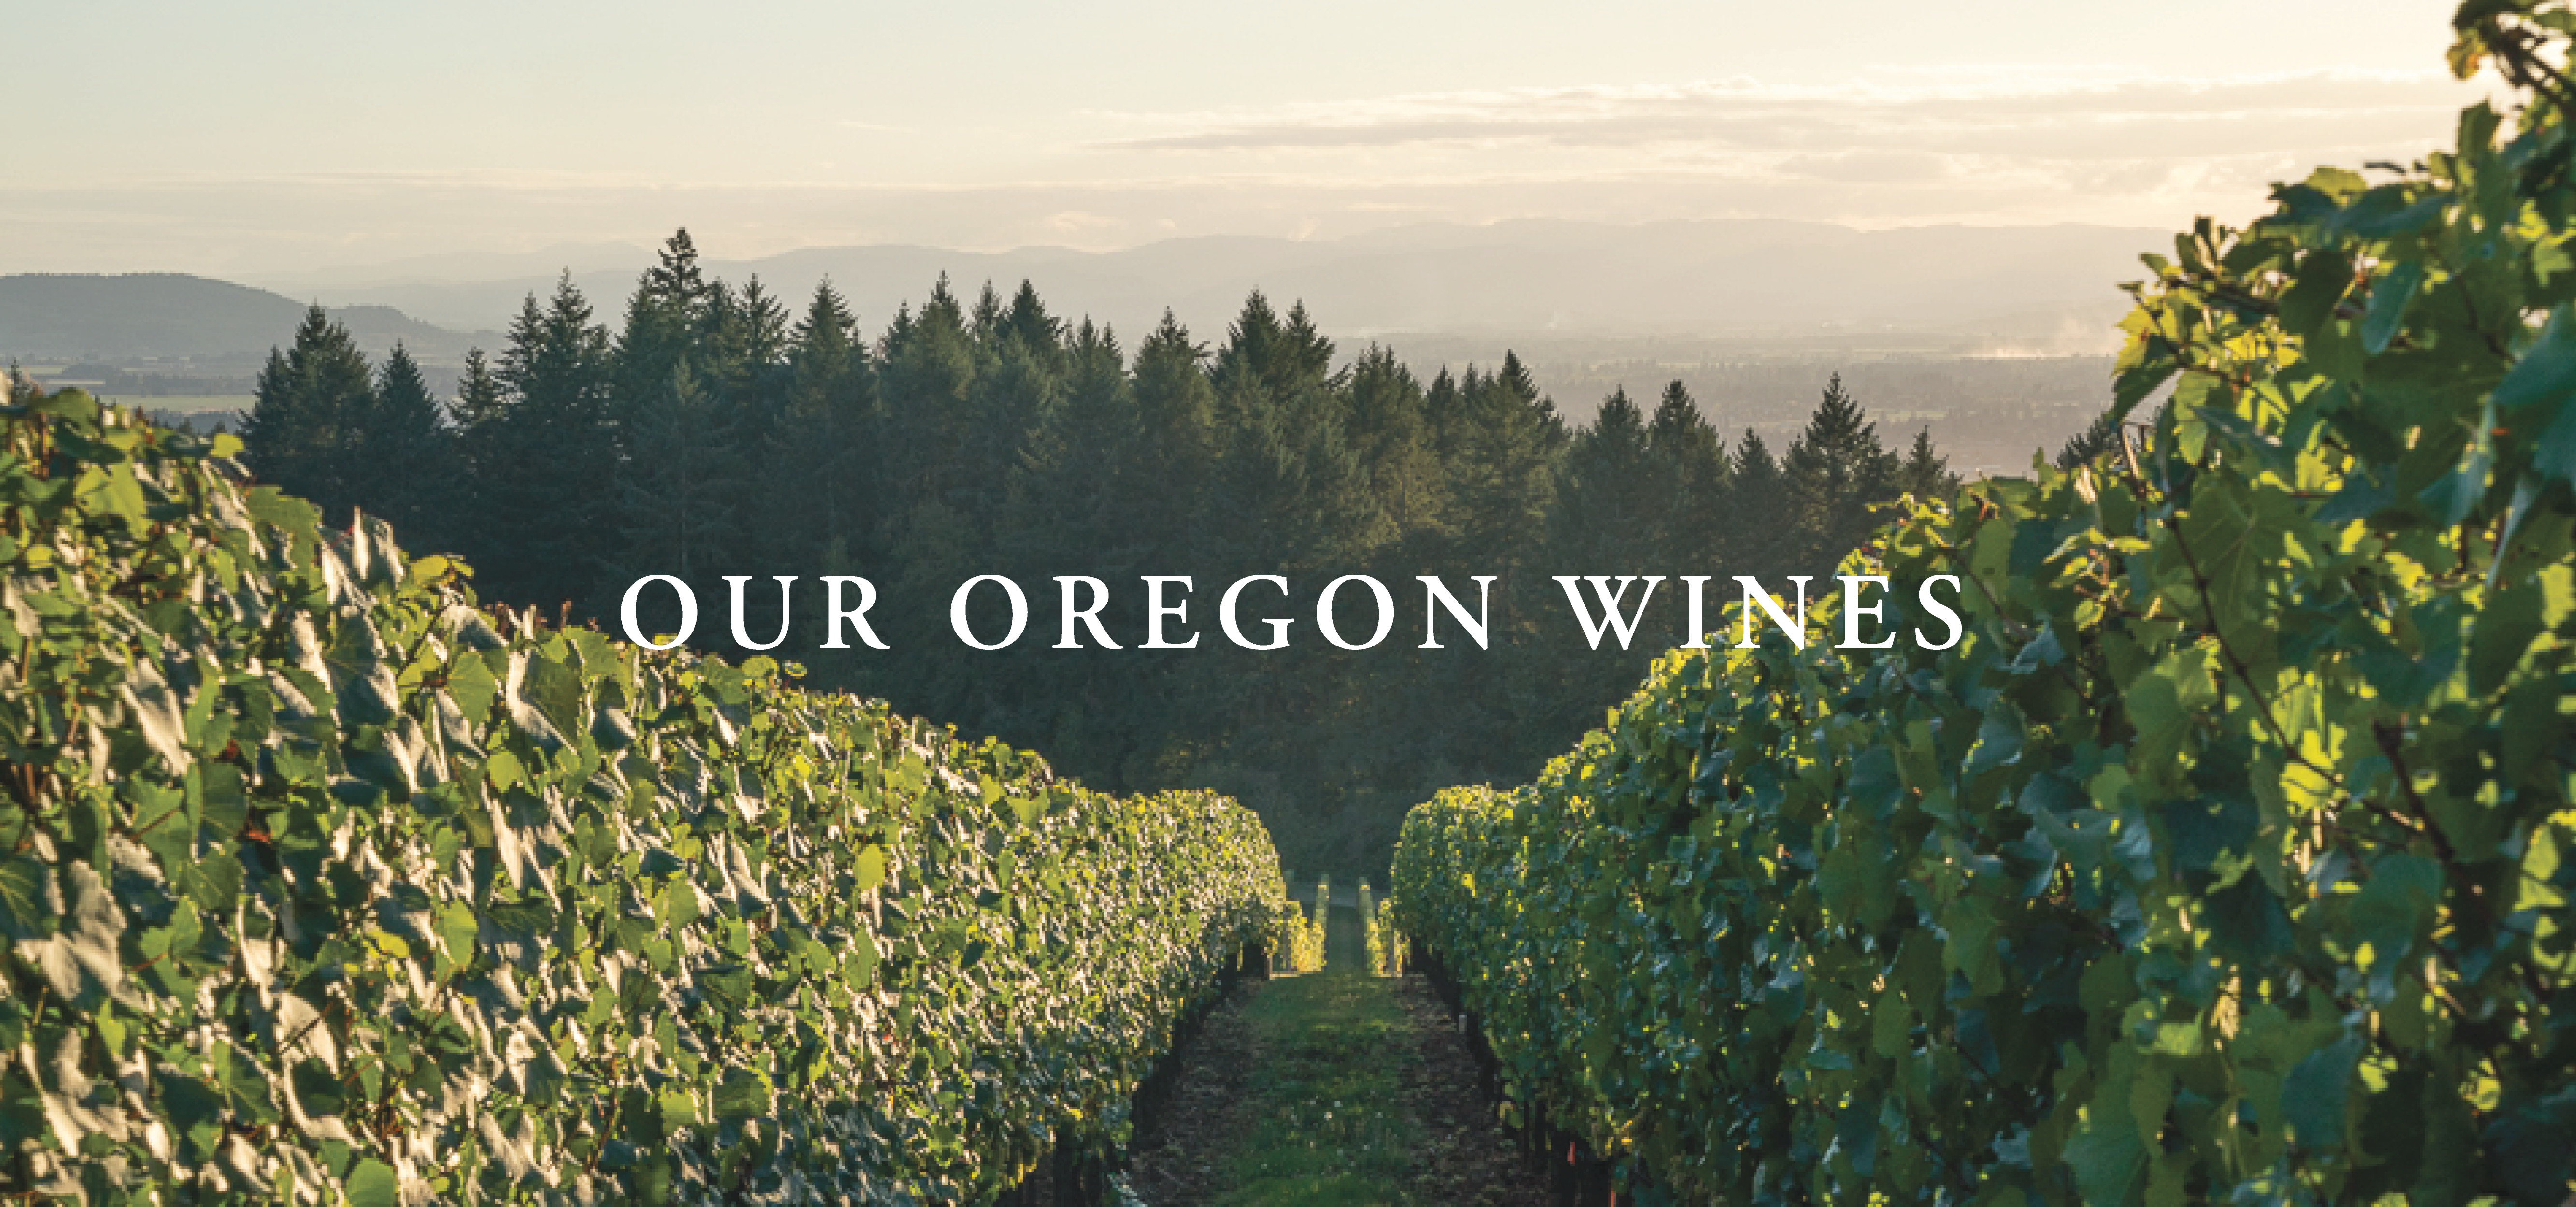 Our Oregon Wines